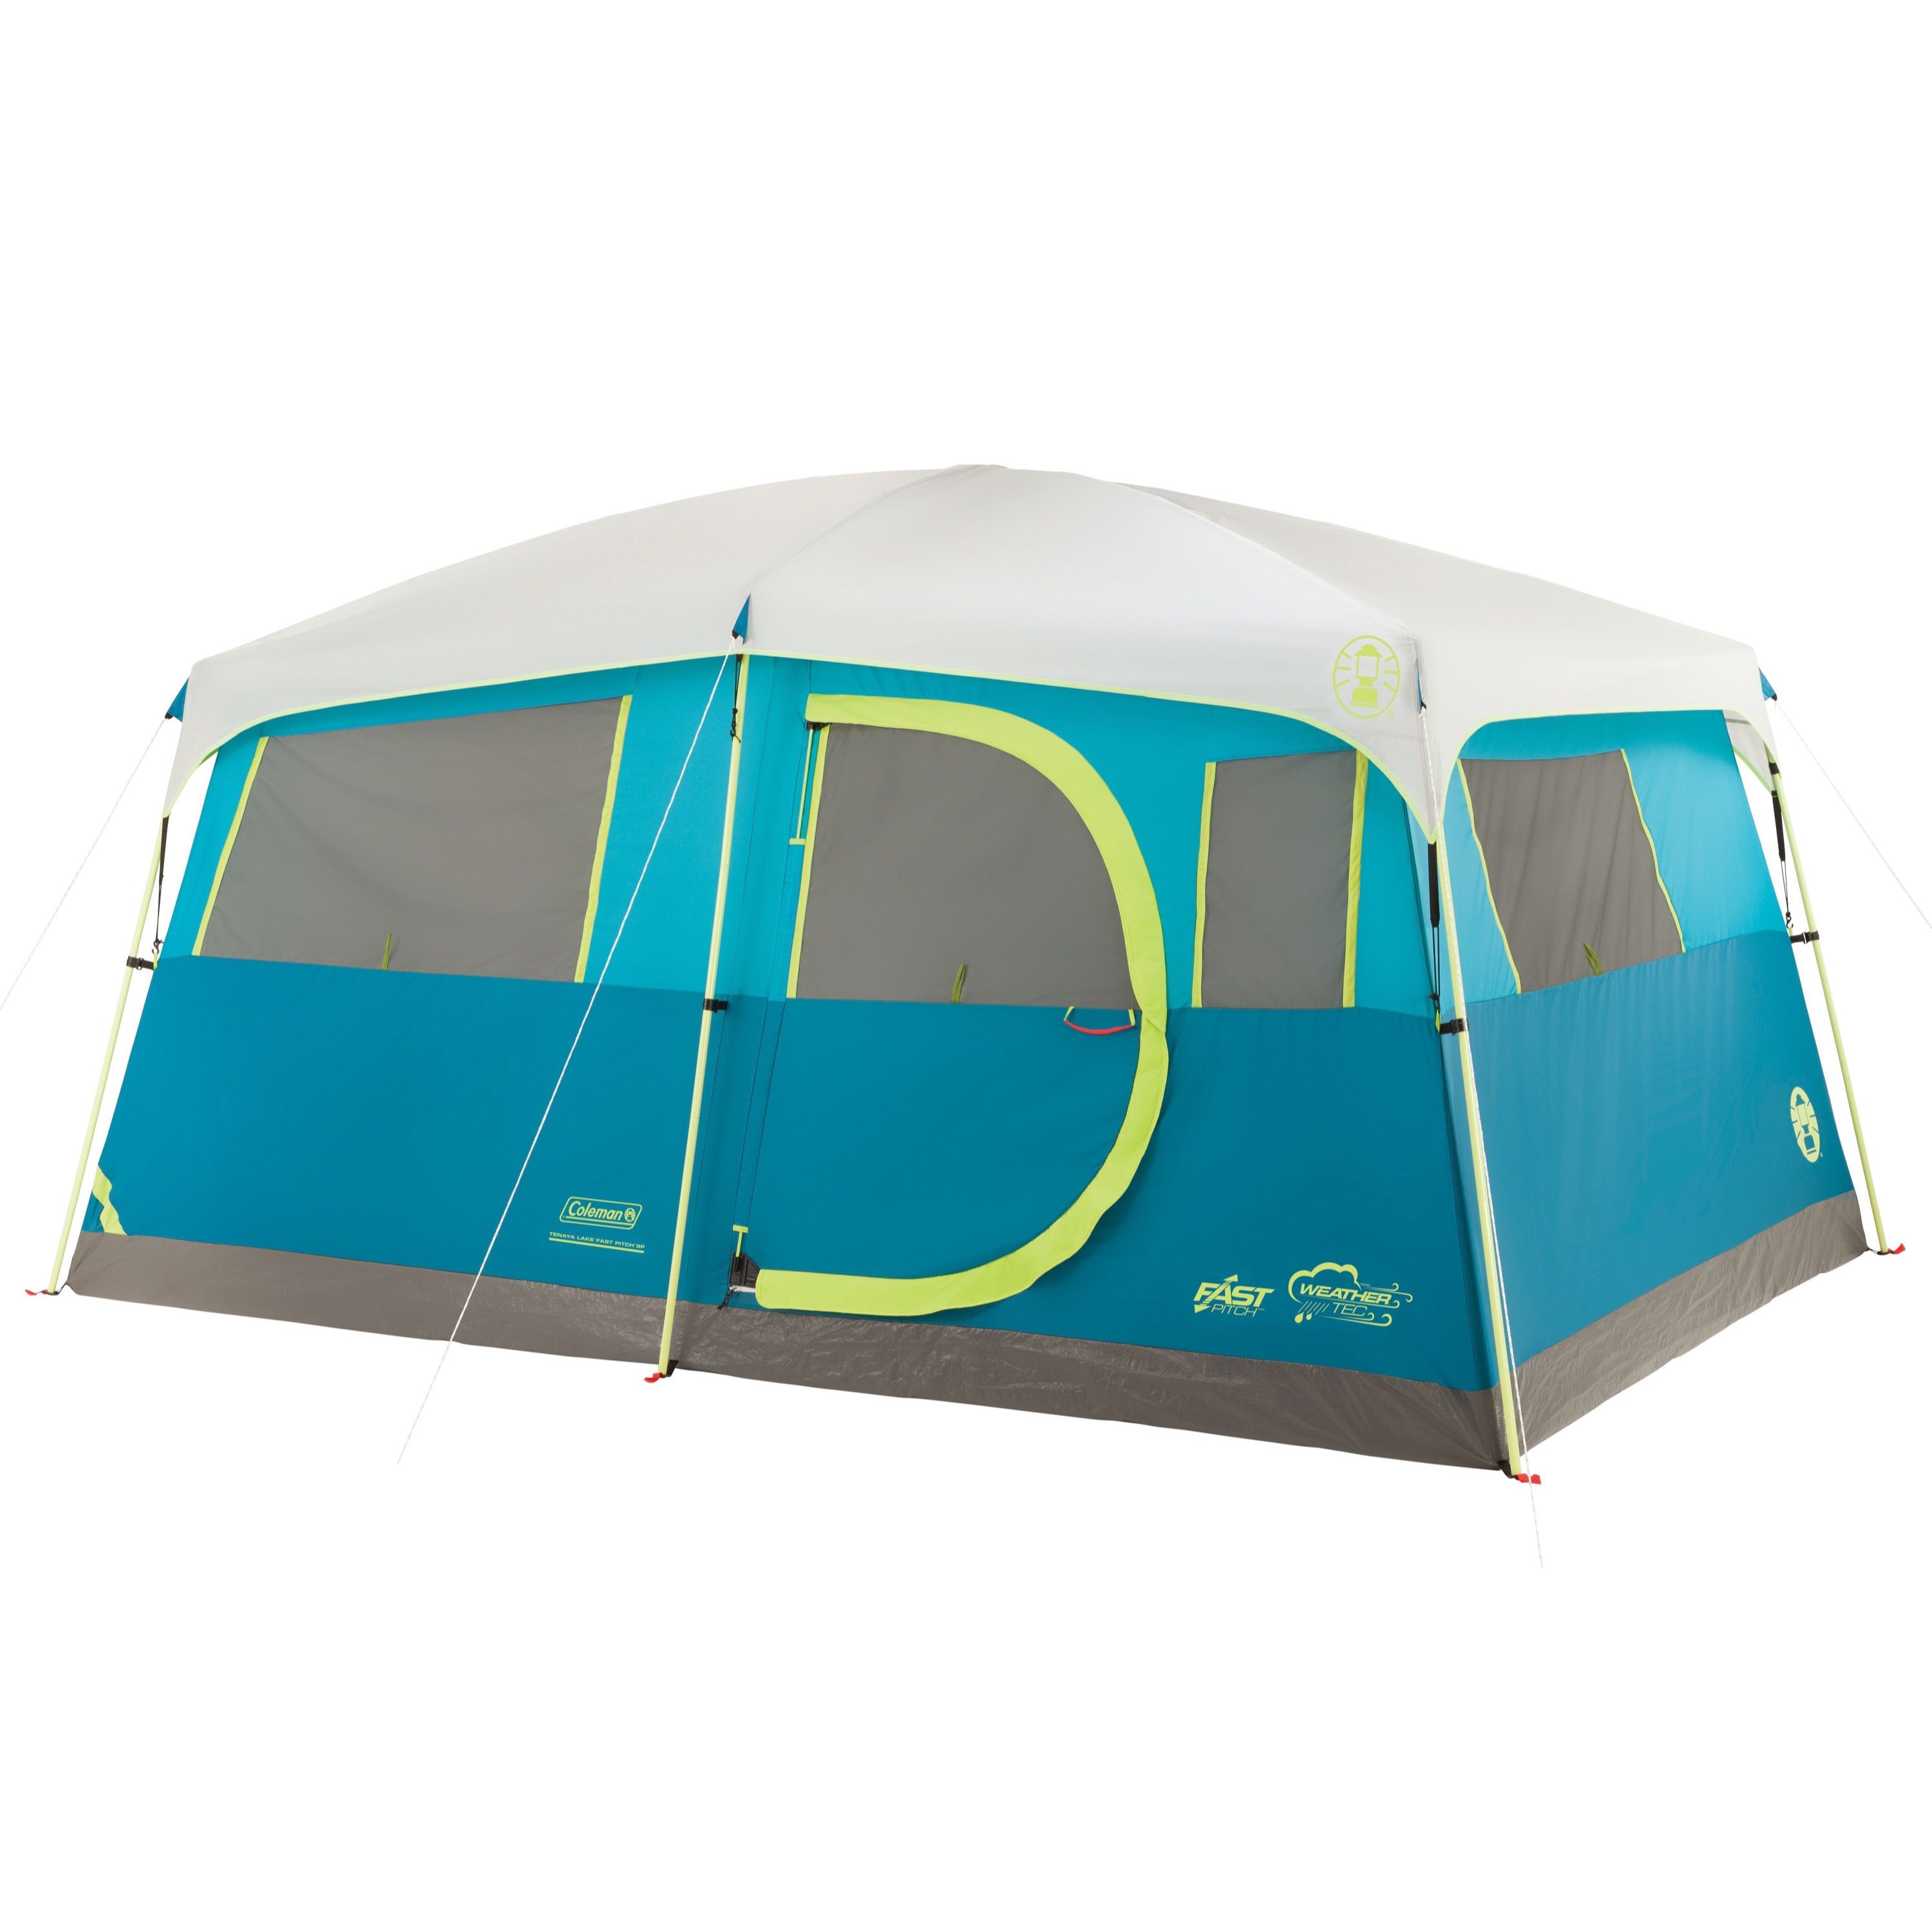 Coleman® 8-Person Tenaya Lake™ Fast Pitch™ Cabin Camping Tent with Closet, Light Blue - image 1 of 11